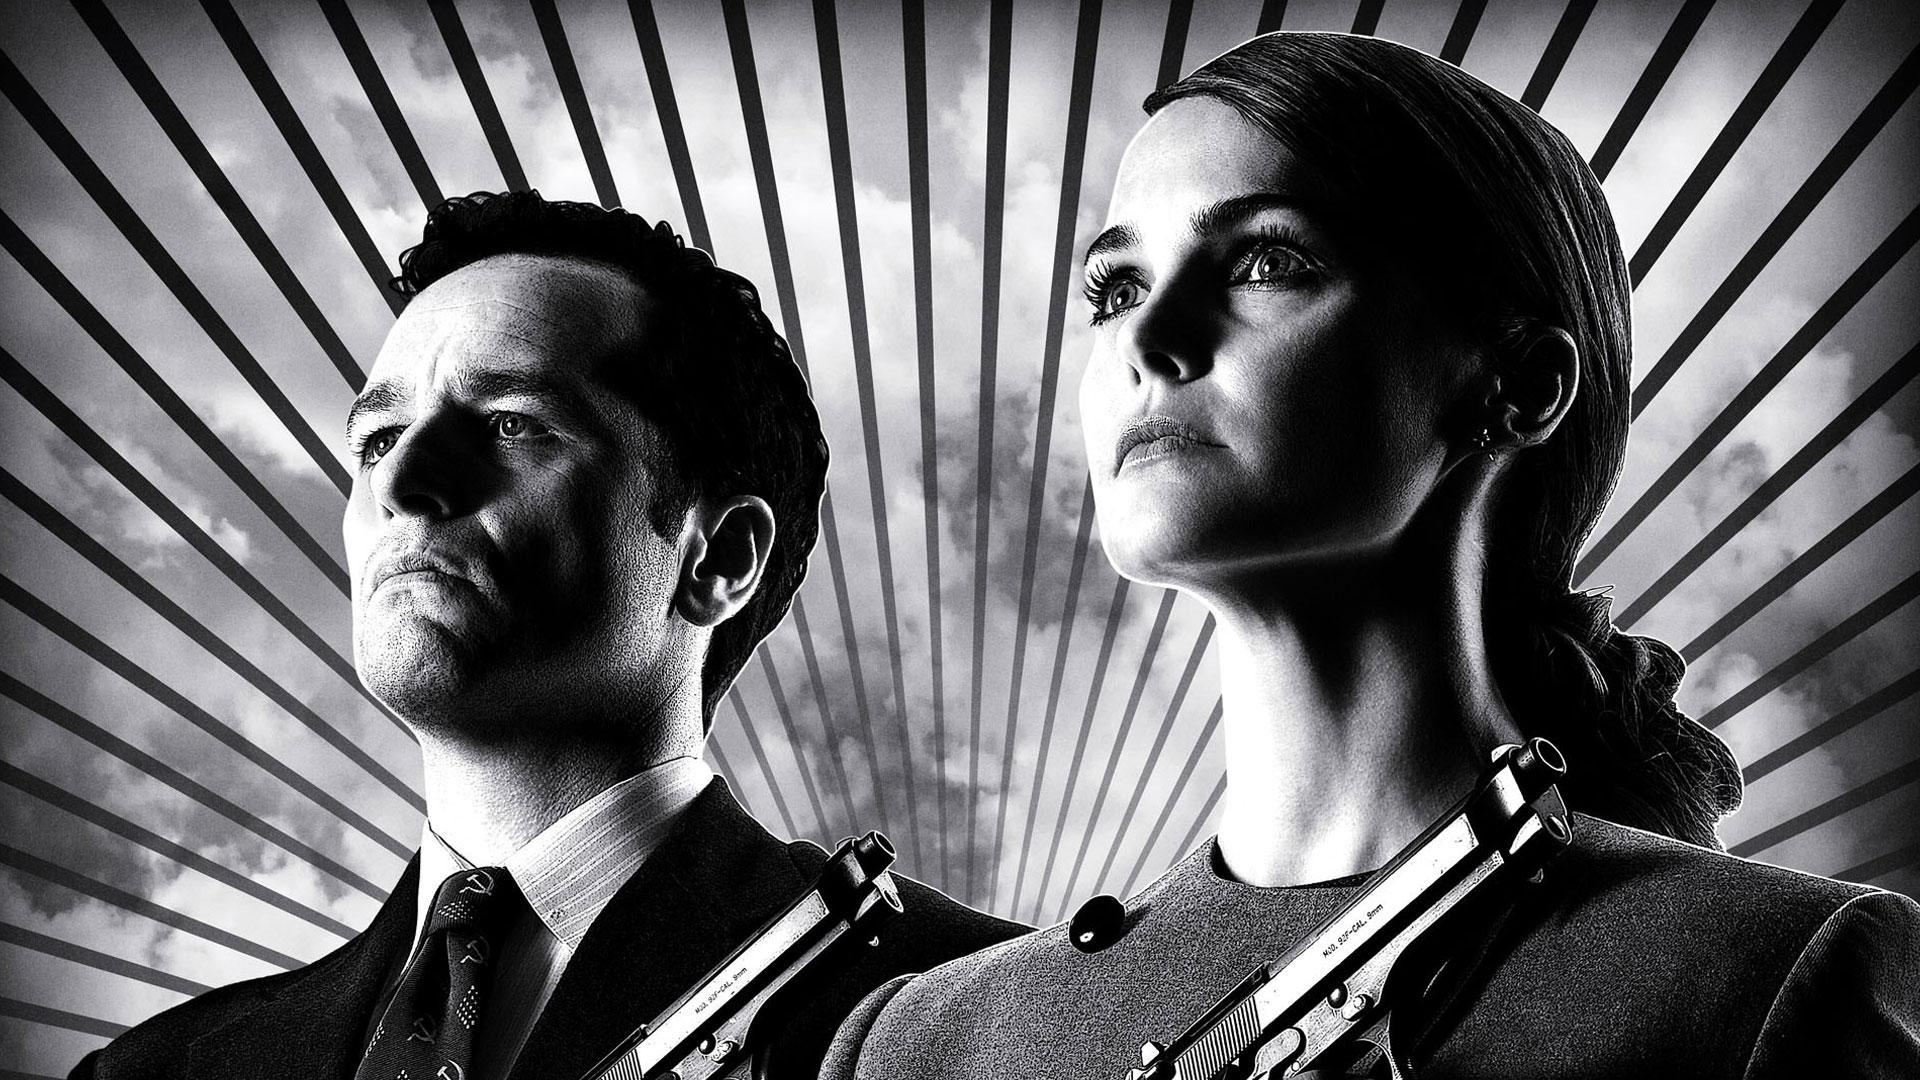 Best Television Series - Drama: The Americans